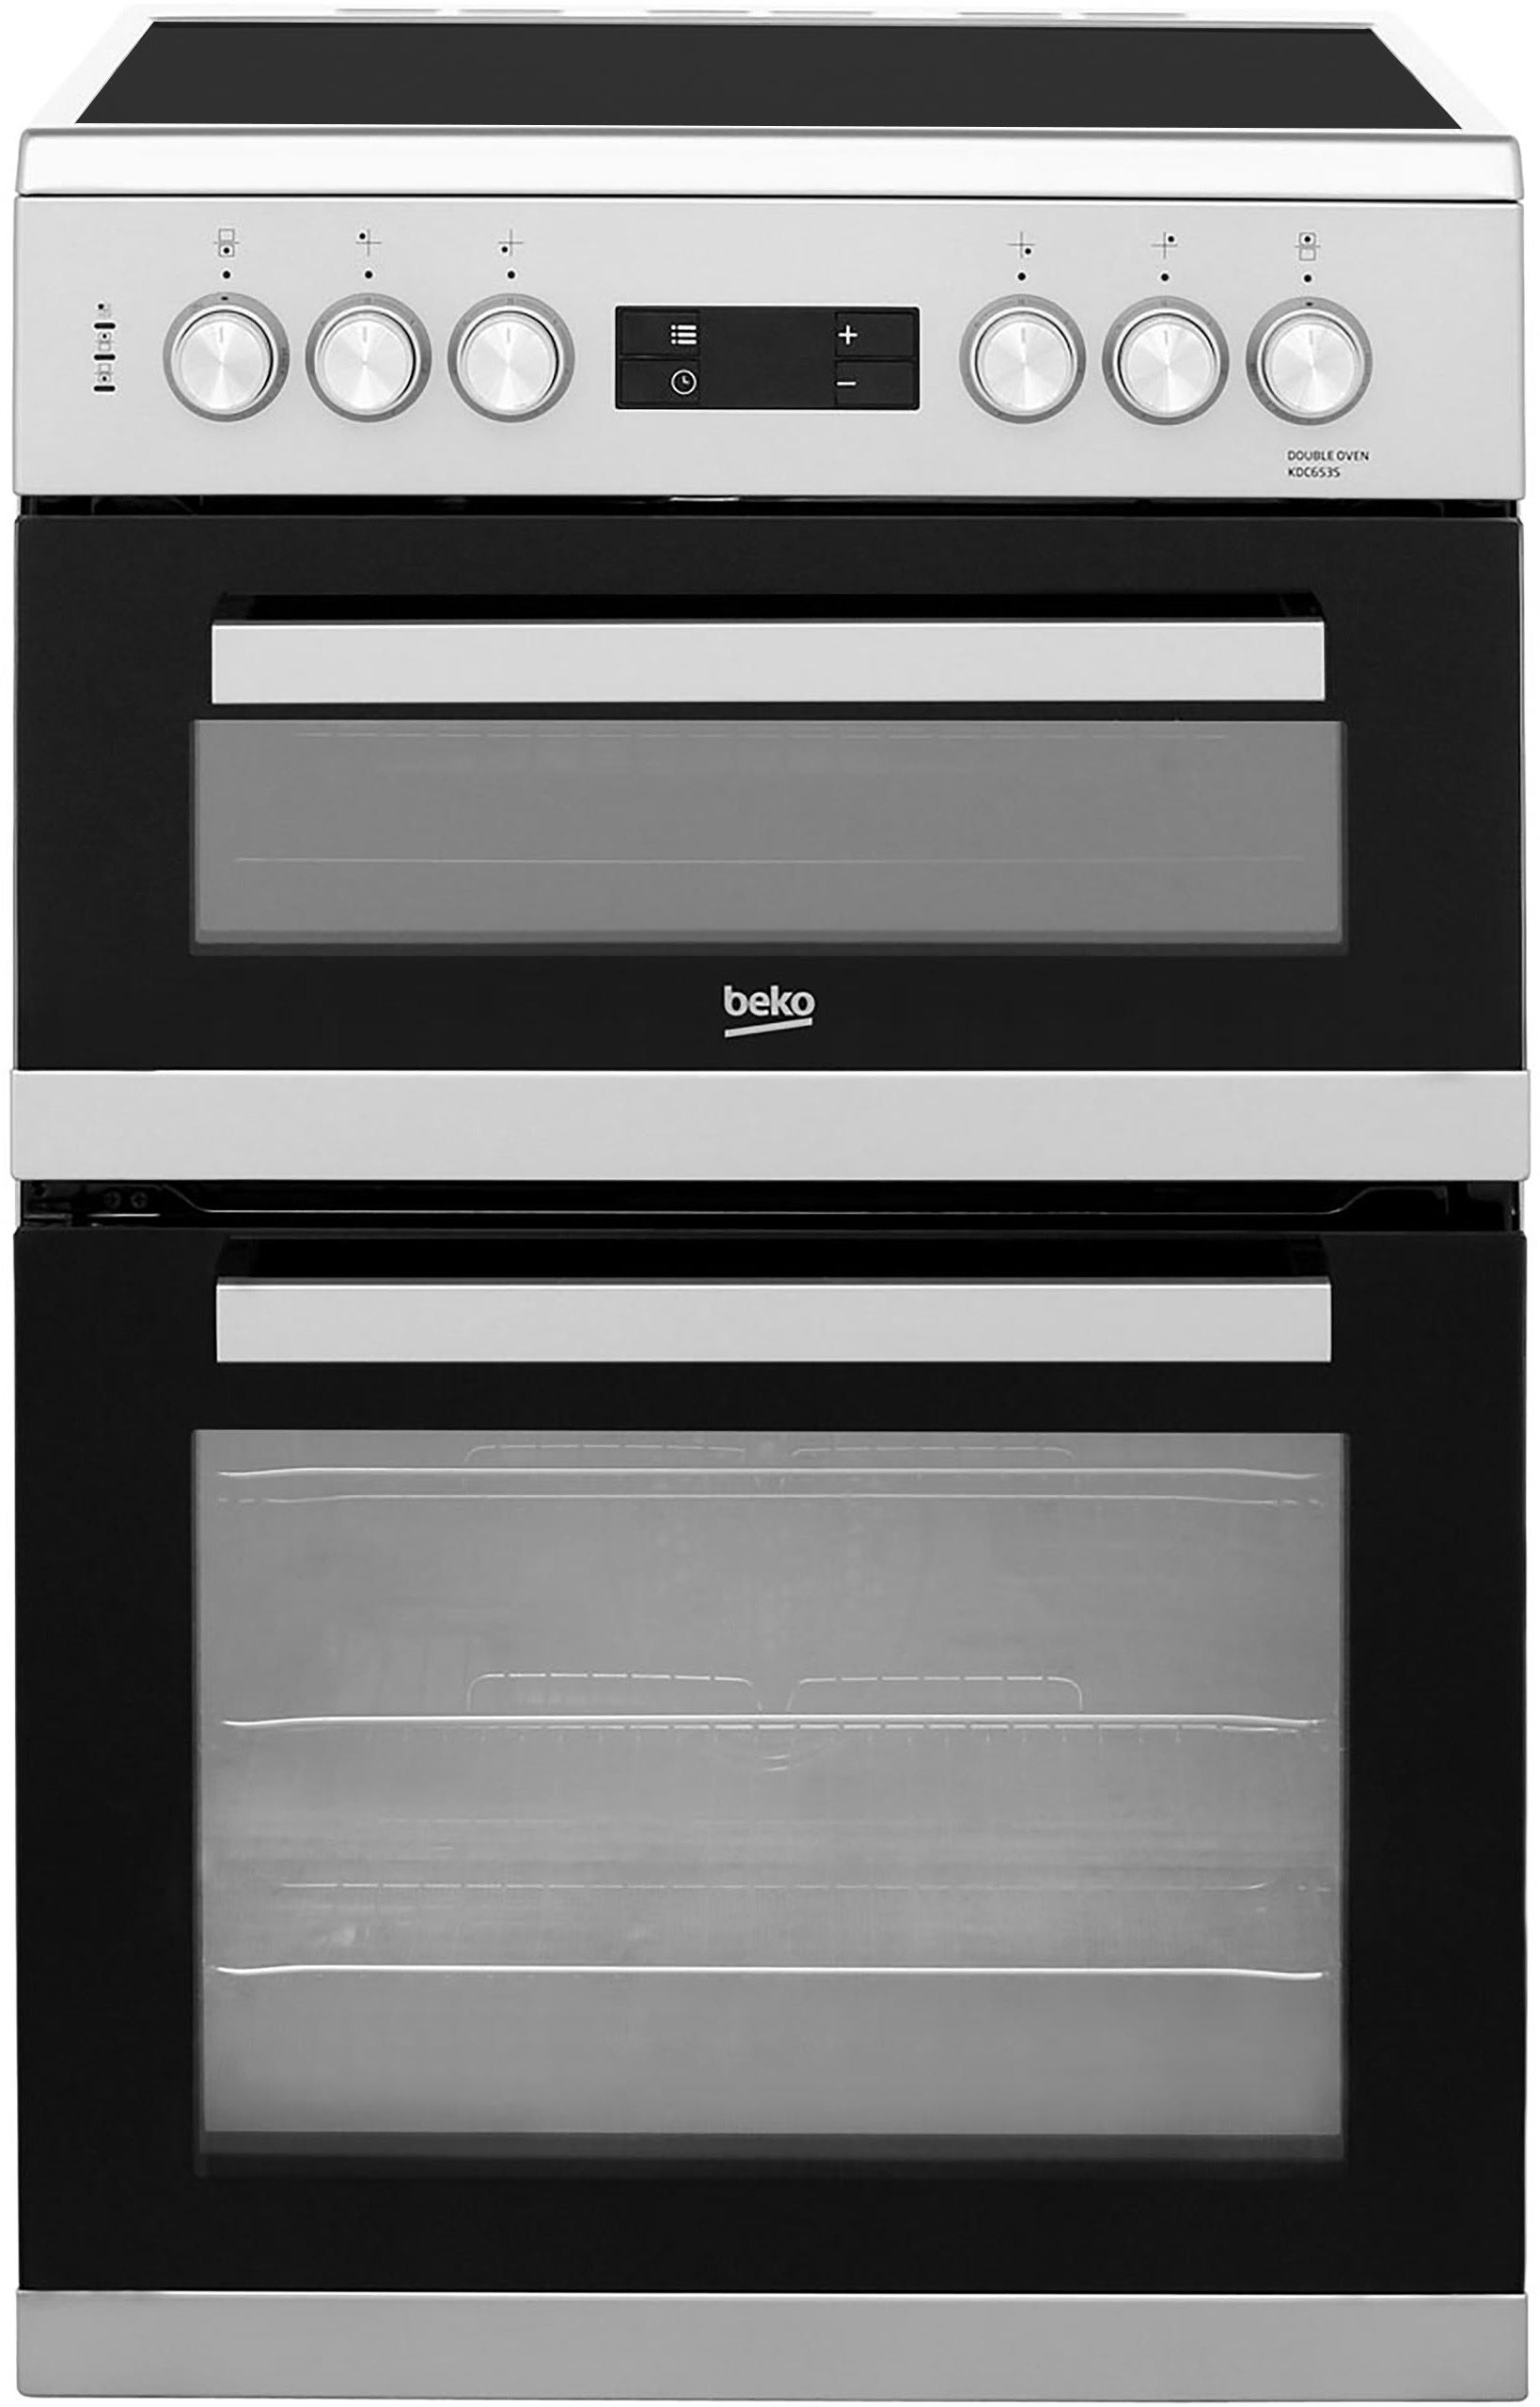 Beko KDC653S 60cm Electric Cooker with Ceramic Hob - Silver - A/A Rated, Silver